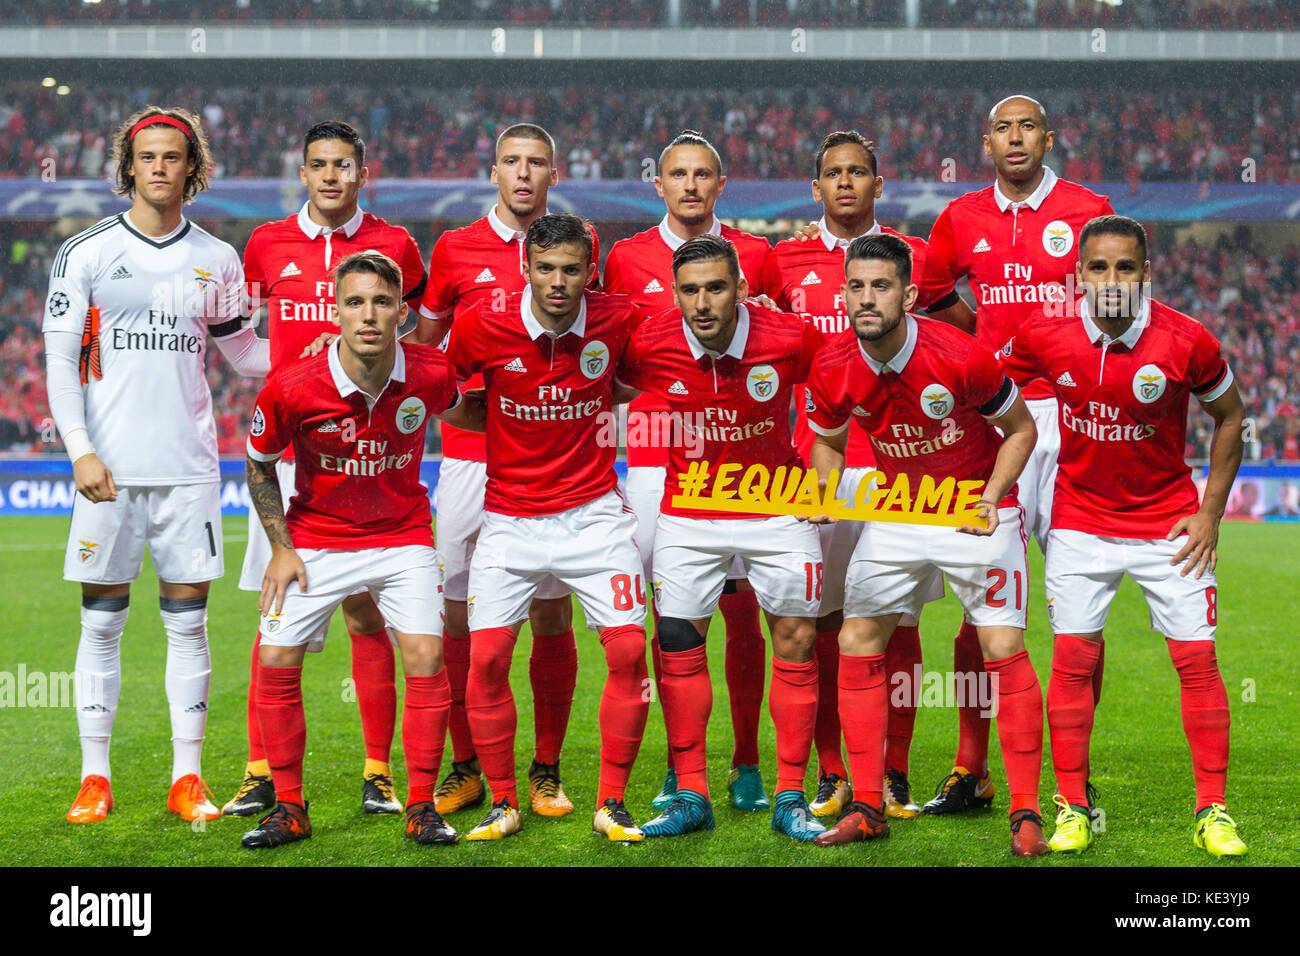 Lisbon Portugal 18th Oct 2017 October 18 2017 Lisbon Portugal Benfica Starting Team For The Game Of The 3rd Round Of The Uefa Champions League Group A Sl Benfica V Manchester United [ 956 x 1300 Pixel ]